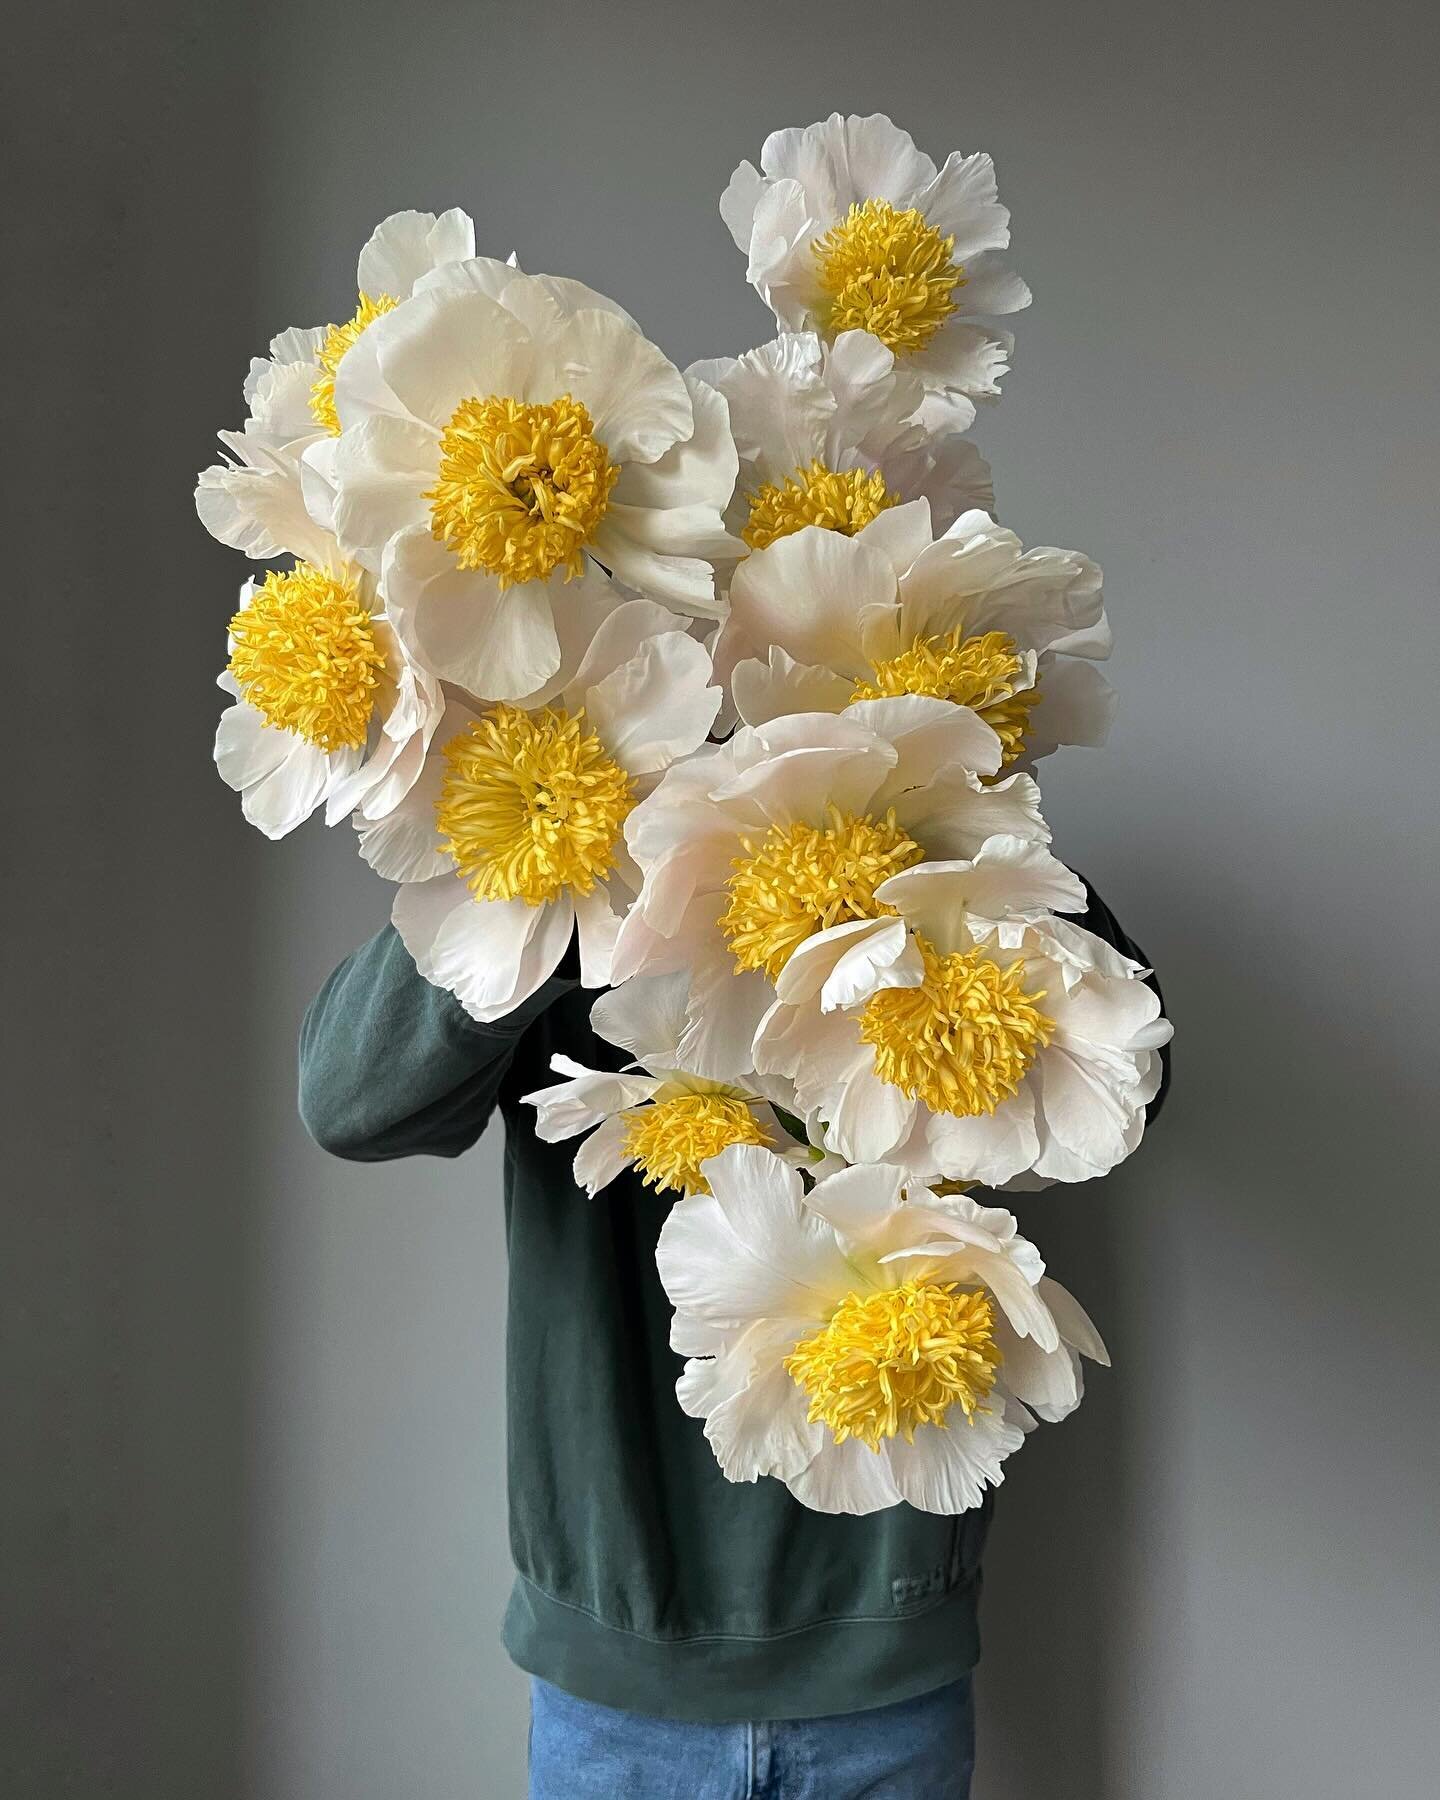 This photo lives rent free in my head always, so I figured I&rsquo;d share it again 💛 always thinking about these Esther peonies 💛